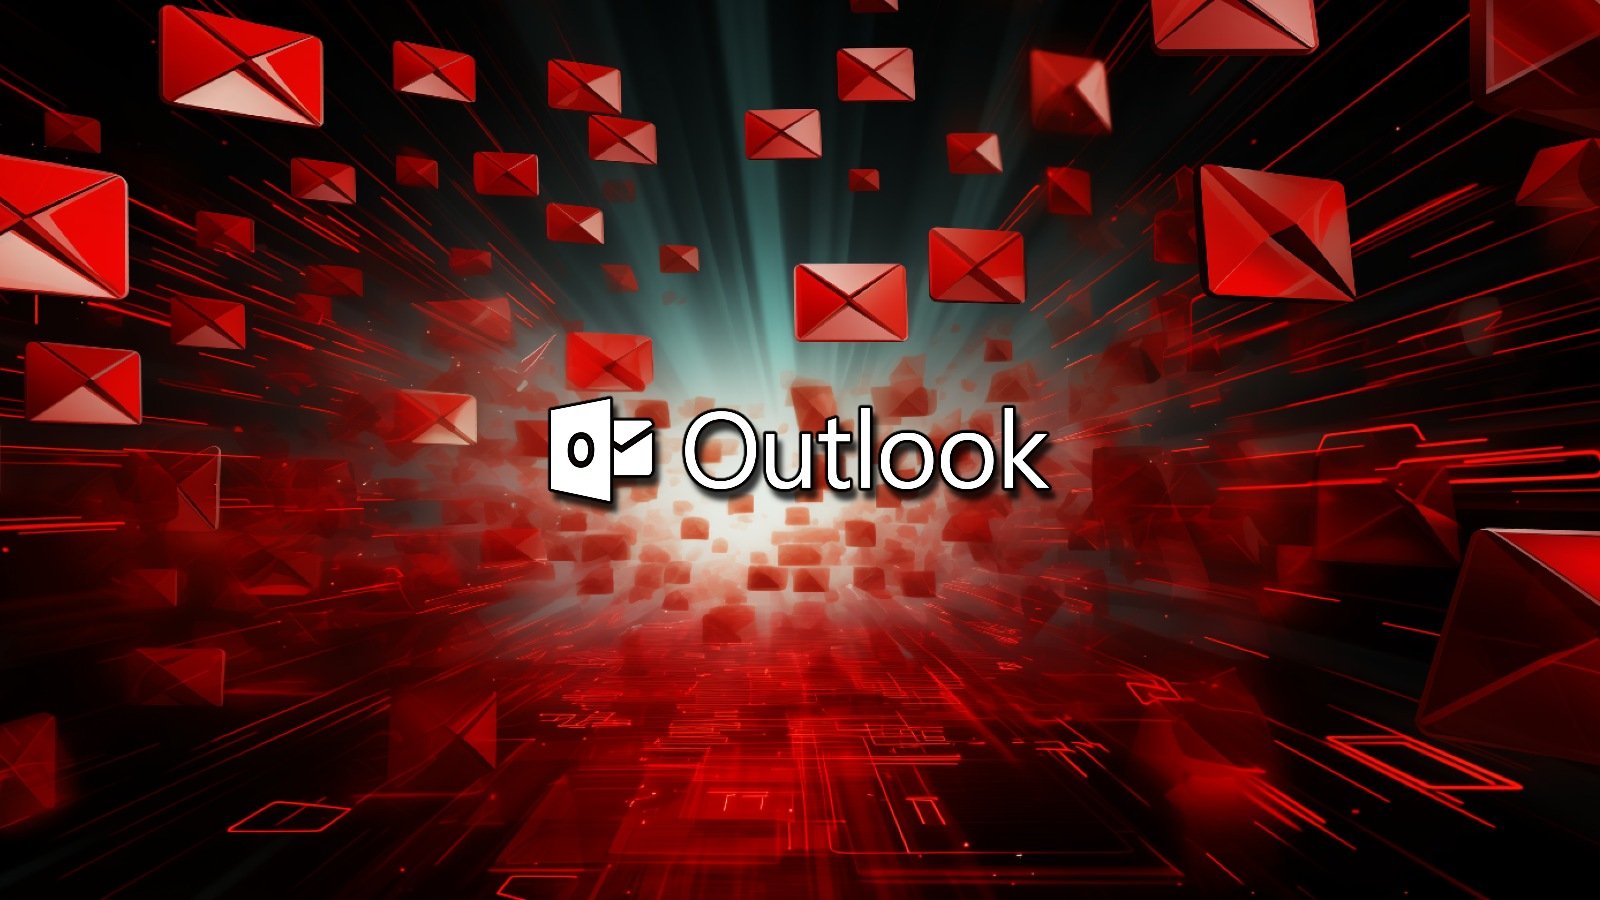 Microsoft fixes connection issue affecting Outlook email apps